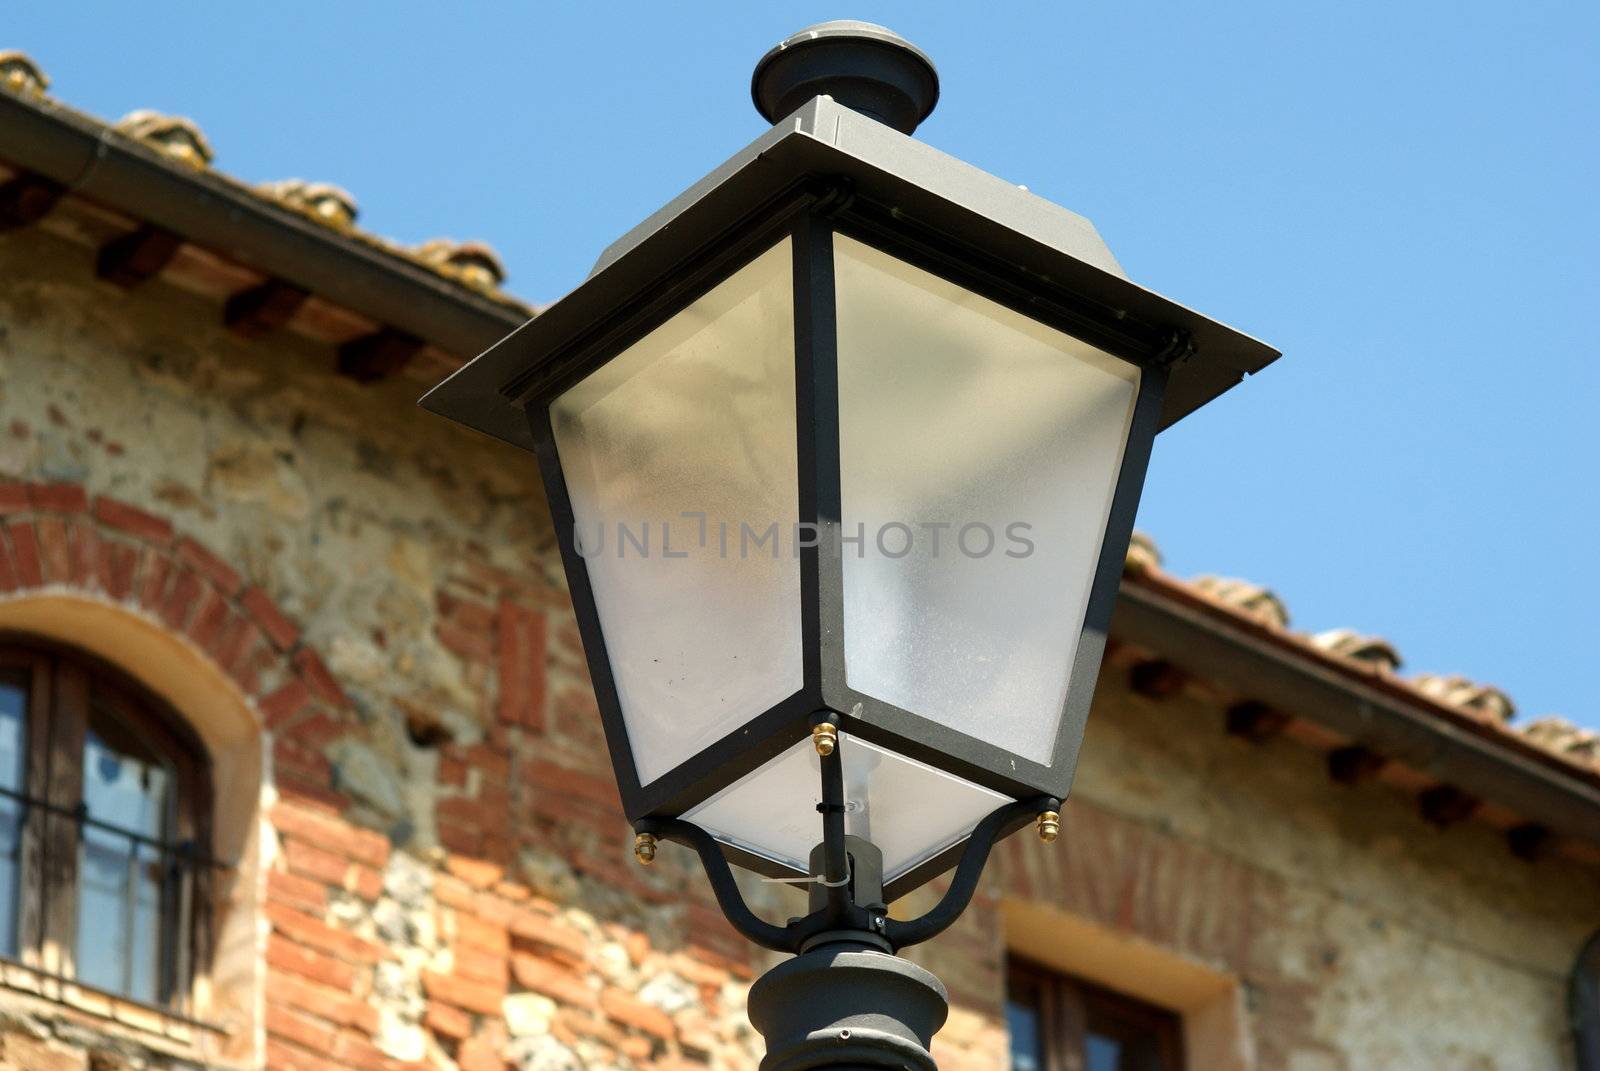 Image of an antique lamp in Italy 